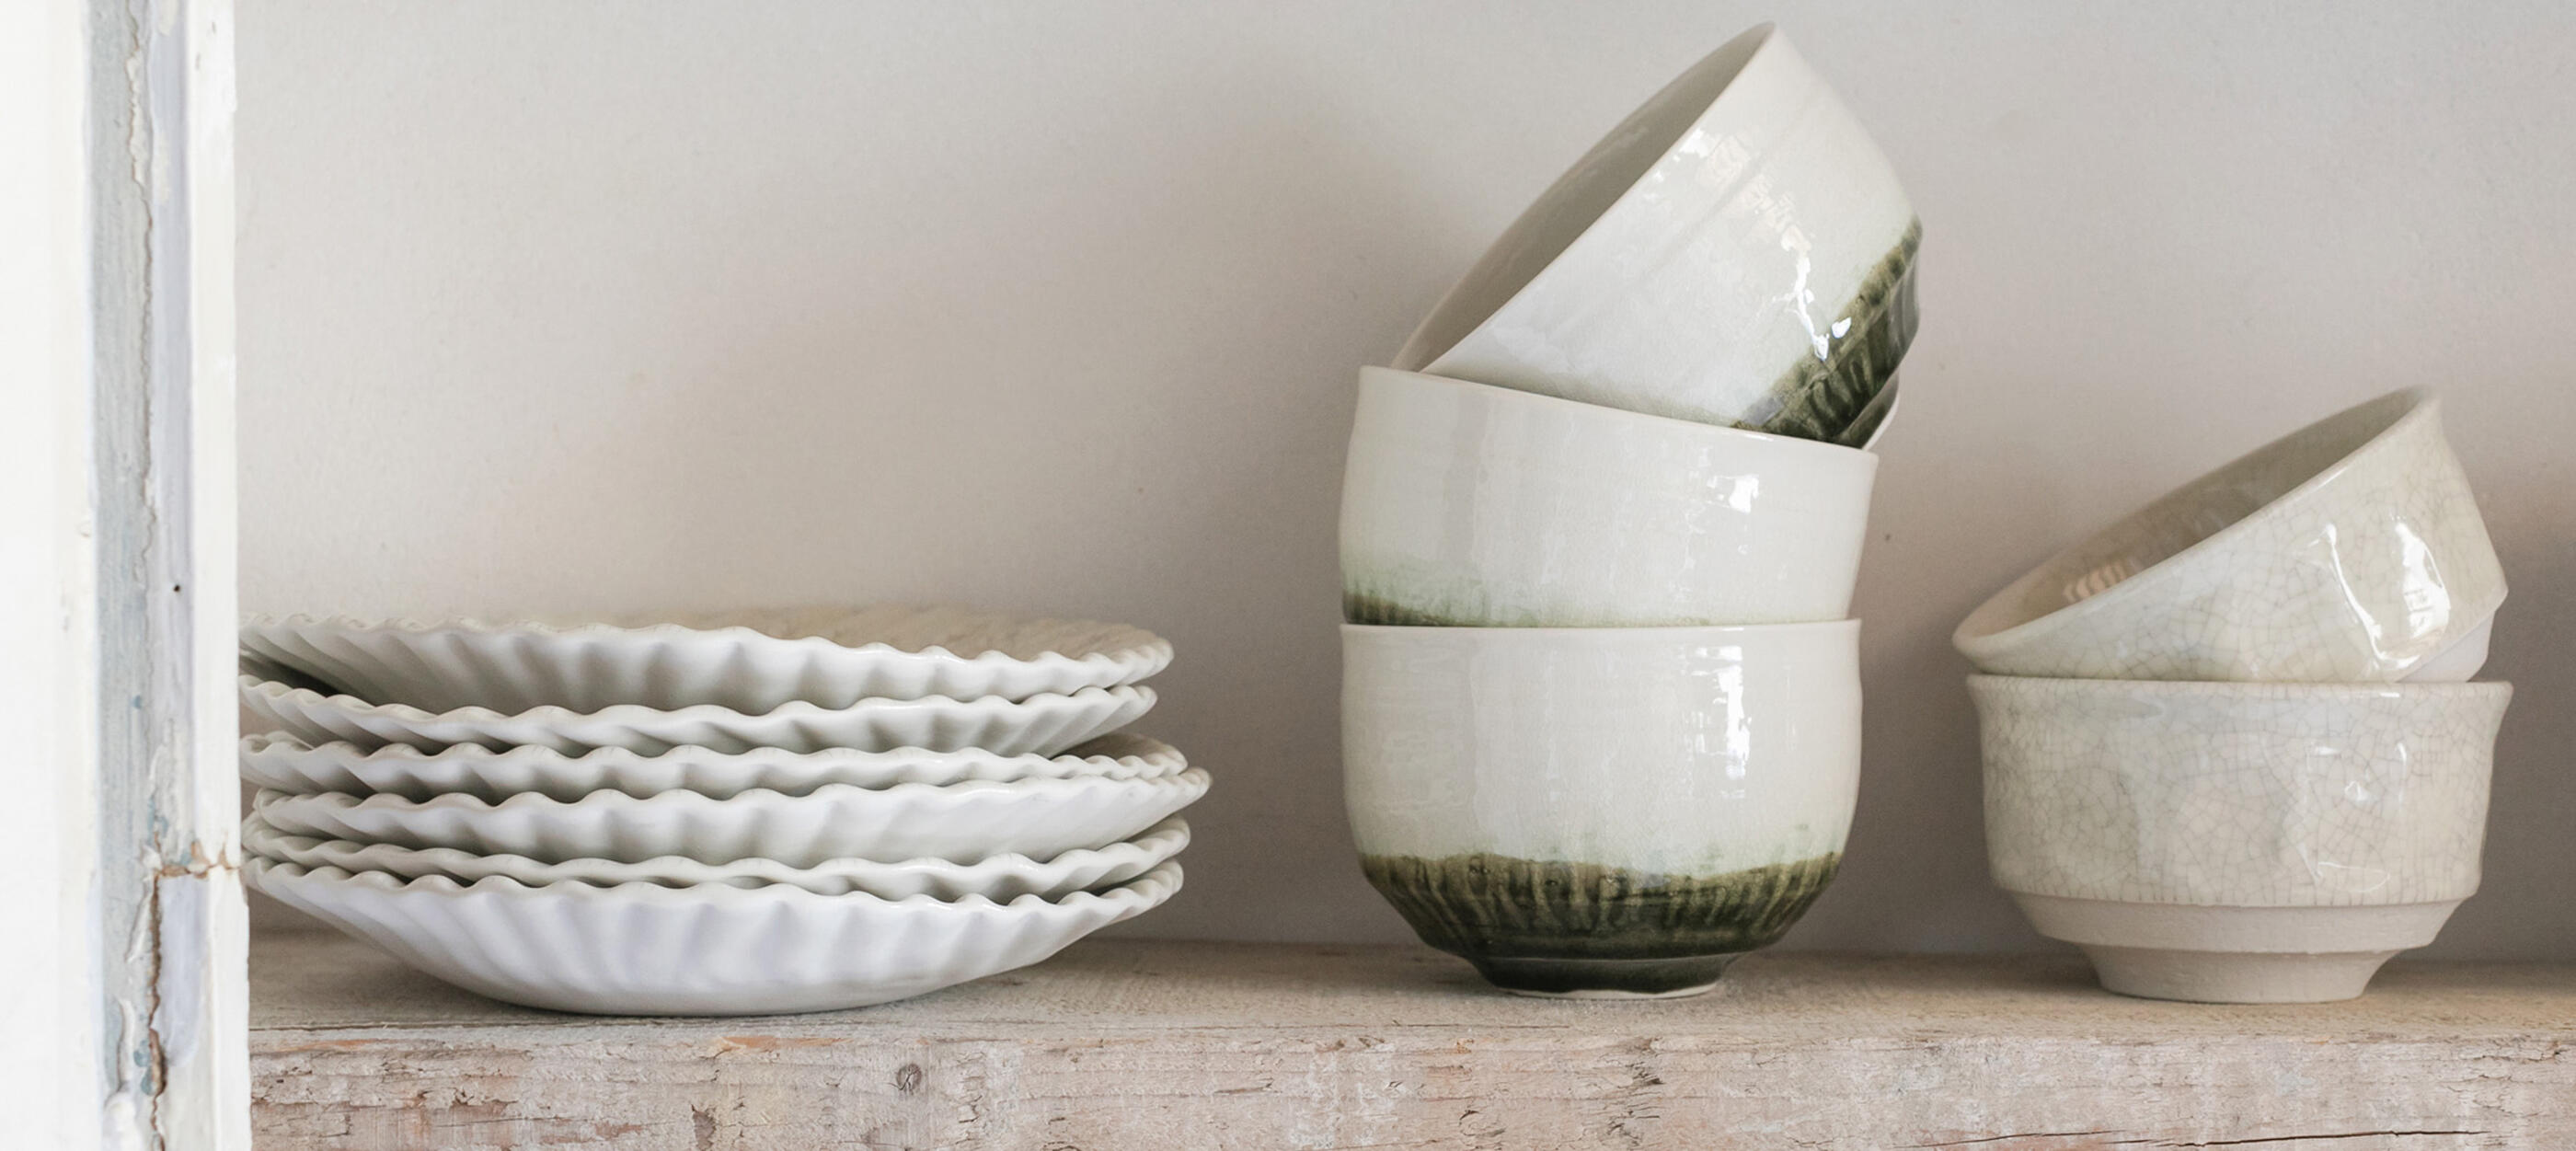 21 Cool Vases to Decorate Your Space: Hand-Blown Glass, Ceramic Pottery &  More